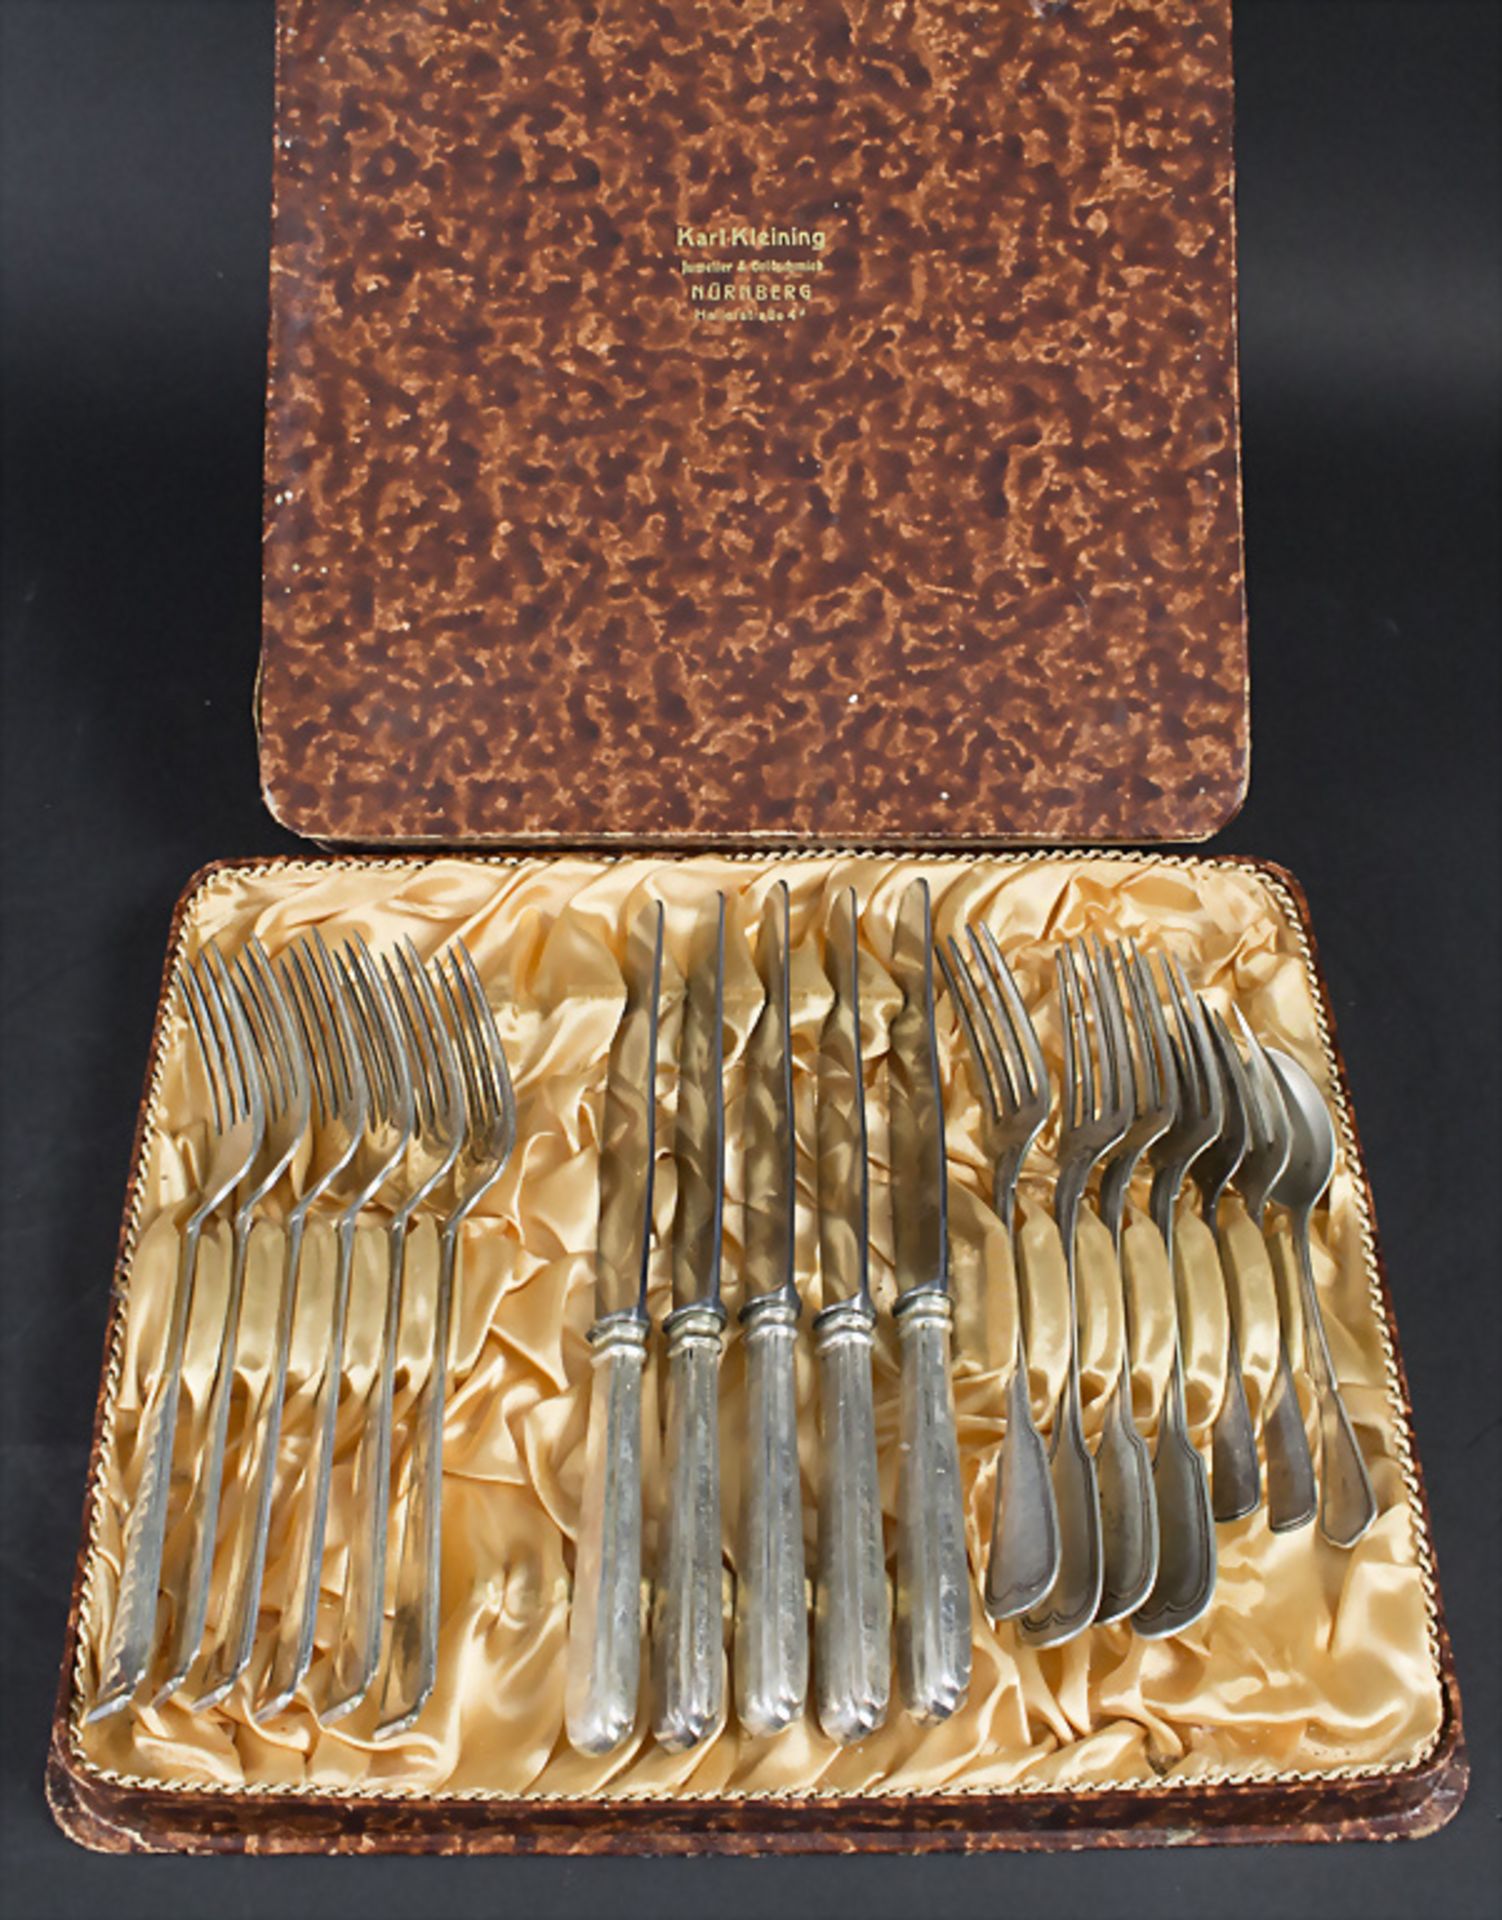 Restbesteck / 18 pieces of cutlery